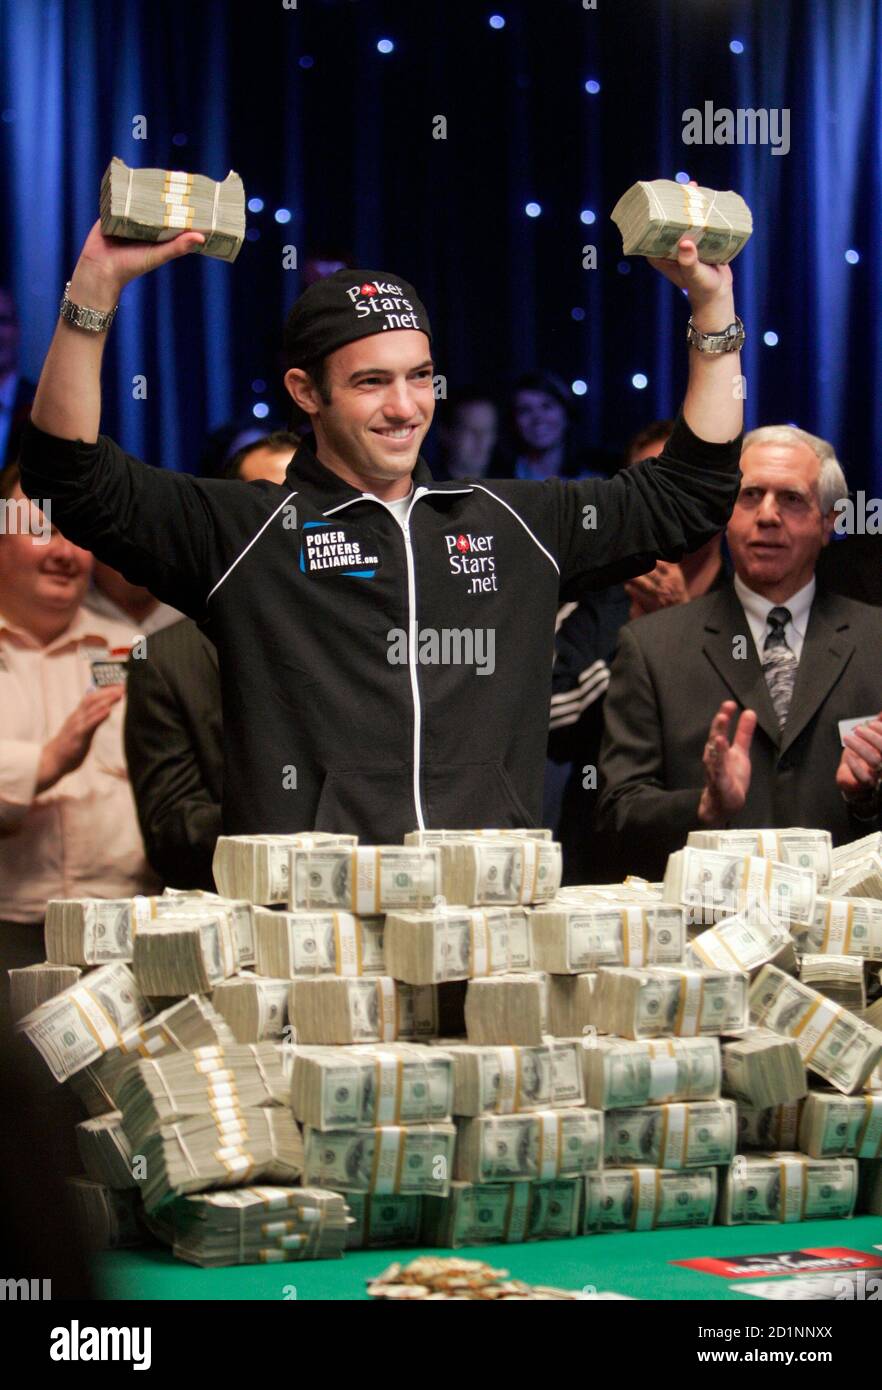 Joe Cada, a 21-year old poker professional from Michigan, celebrates with  bundles of cash after winning $8.5 million in prize money at the World  Series of Poker tournament at the Rio hotel-casino